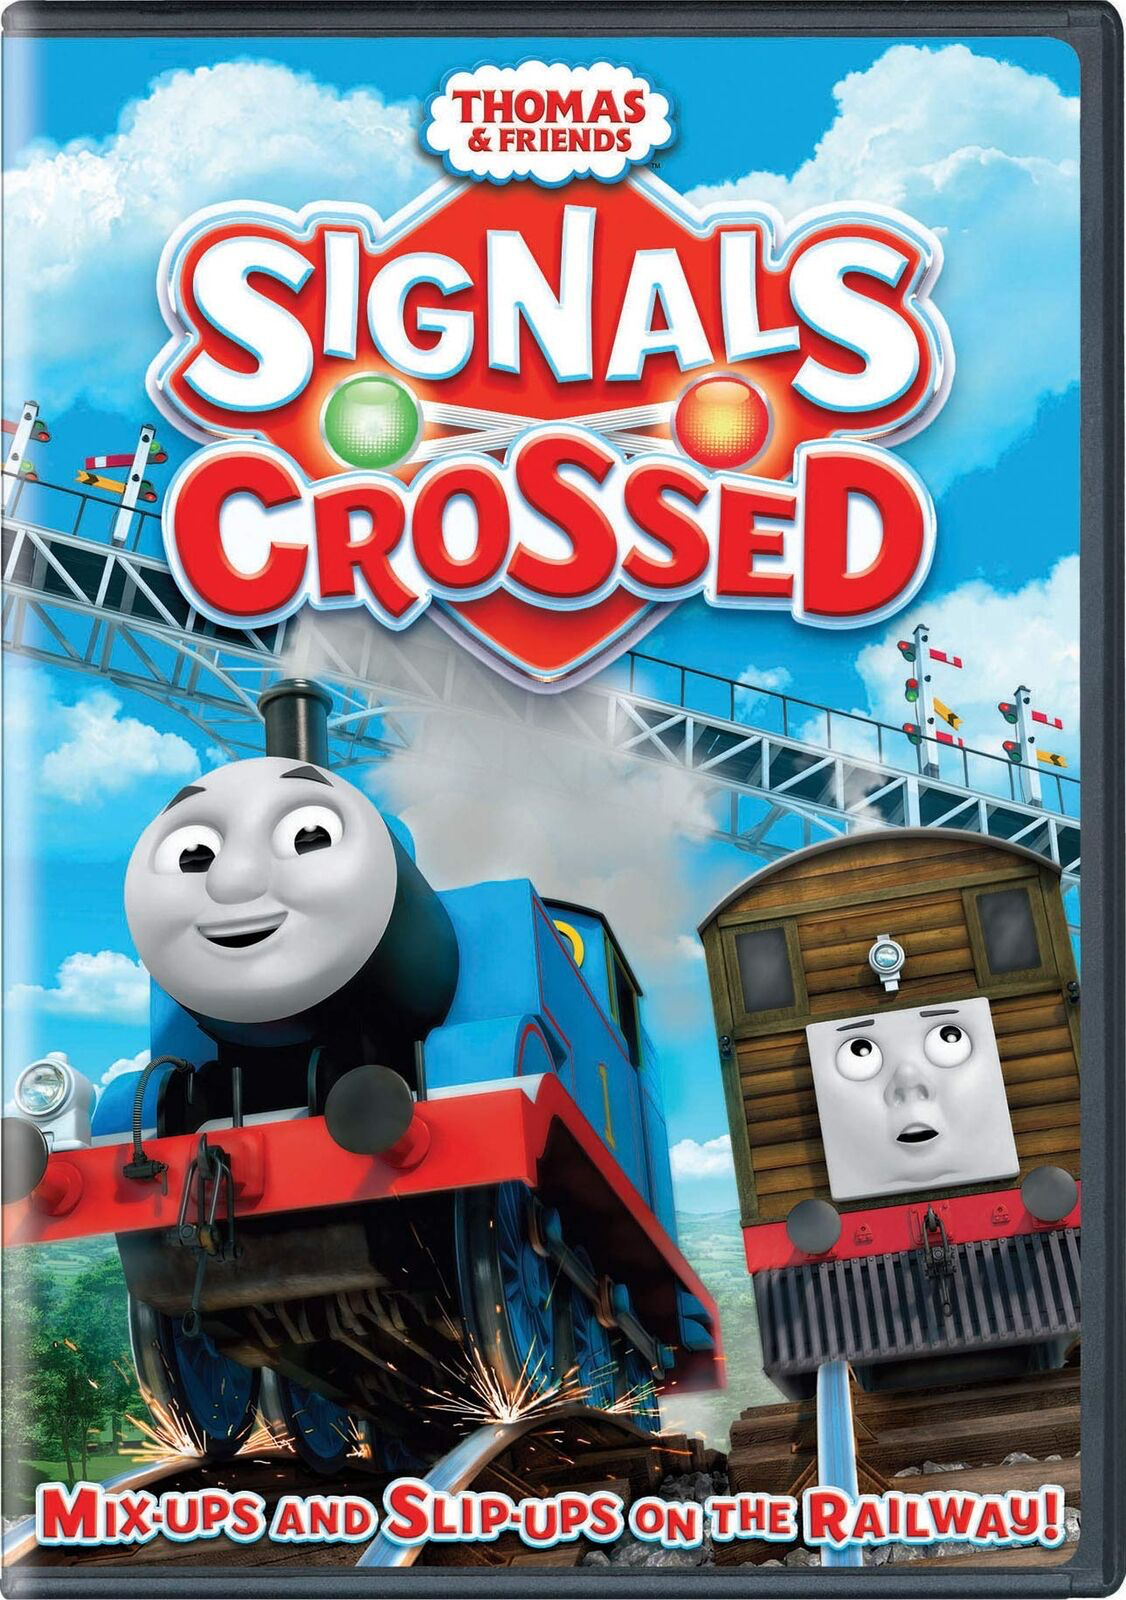 Thomas [The Tank Engine] & Friends: Signals Crossed - DVD